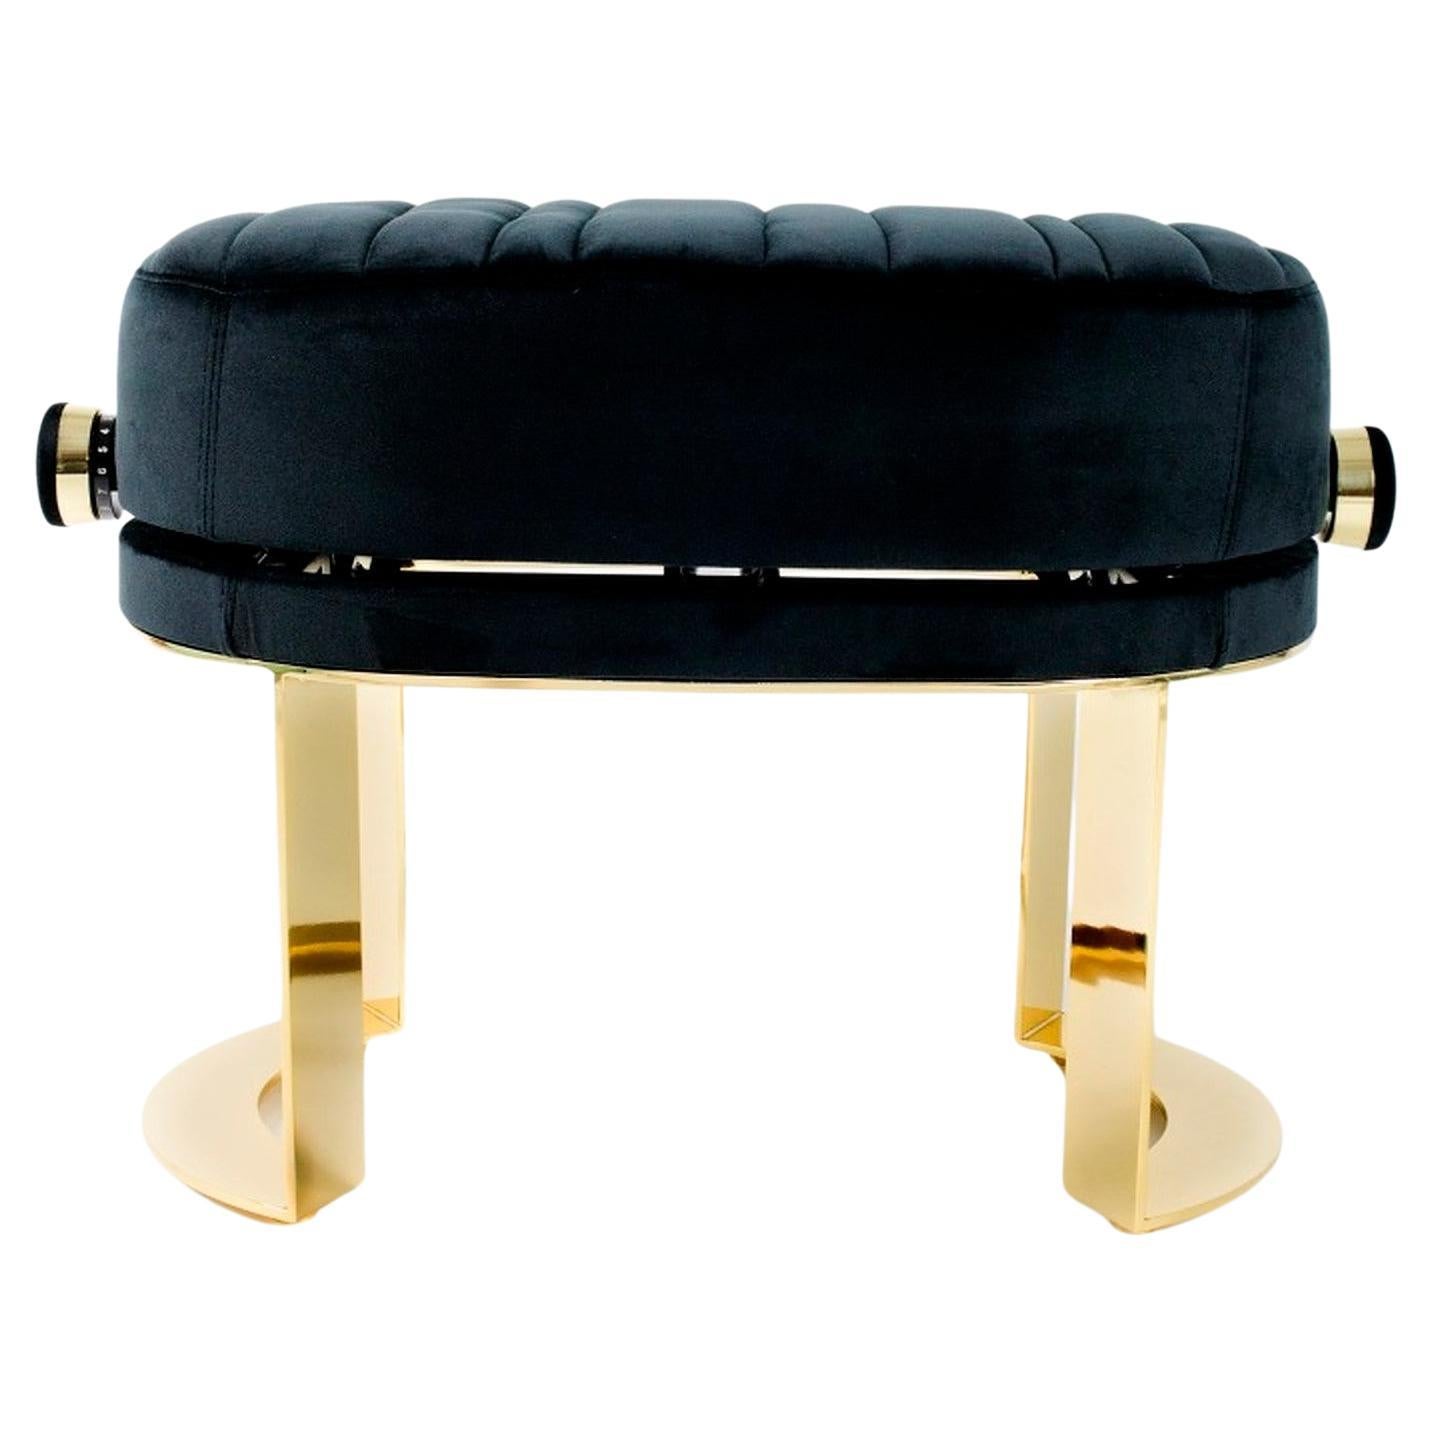 The first Oval Adjustable Piano Bench. 

Lola Piano Bench is a a versatile piece to accompany your piano and also to use as a vanity stool. Design your own Piano stool by choosing between several velvet colors, leather or eco-leather  and chrome,